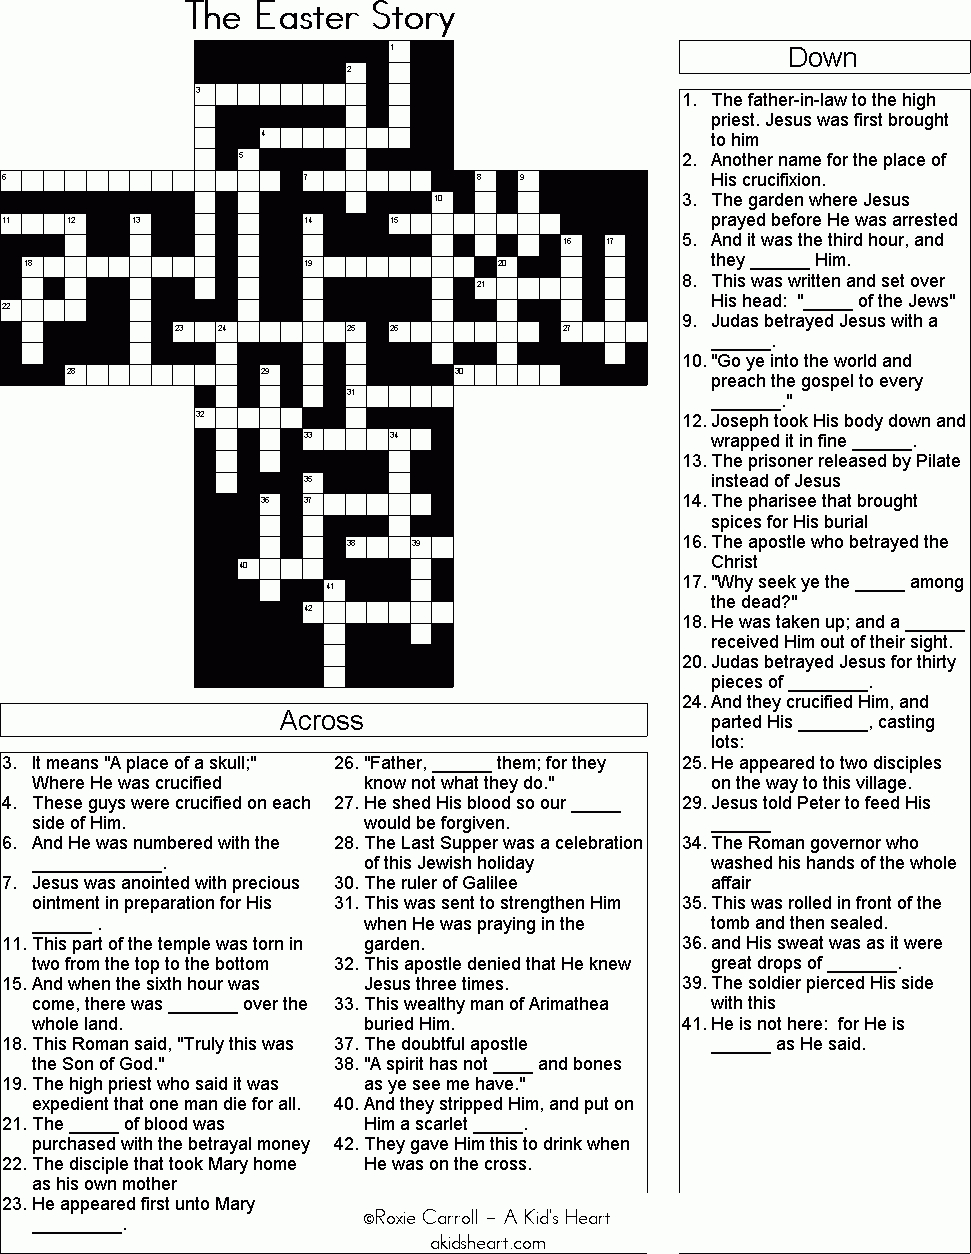 The Easter Story Crossword Puzzle | Bible Crosswords/word Search - Printable Easter Crossword Puzzles For Adults